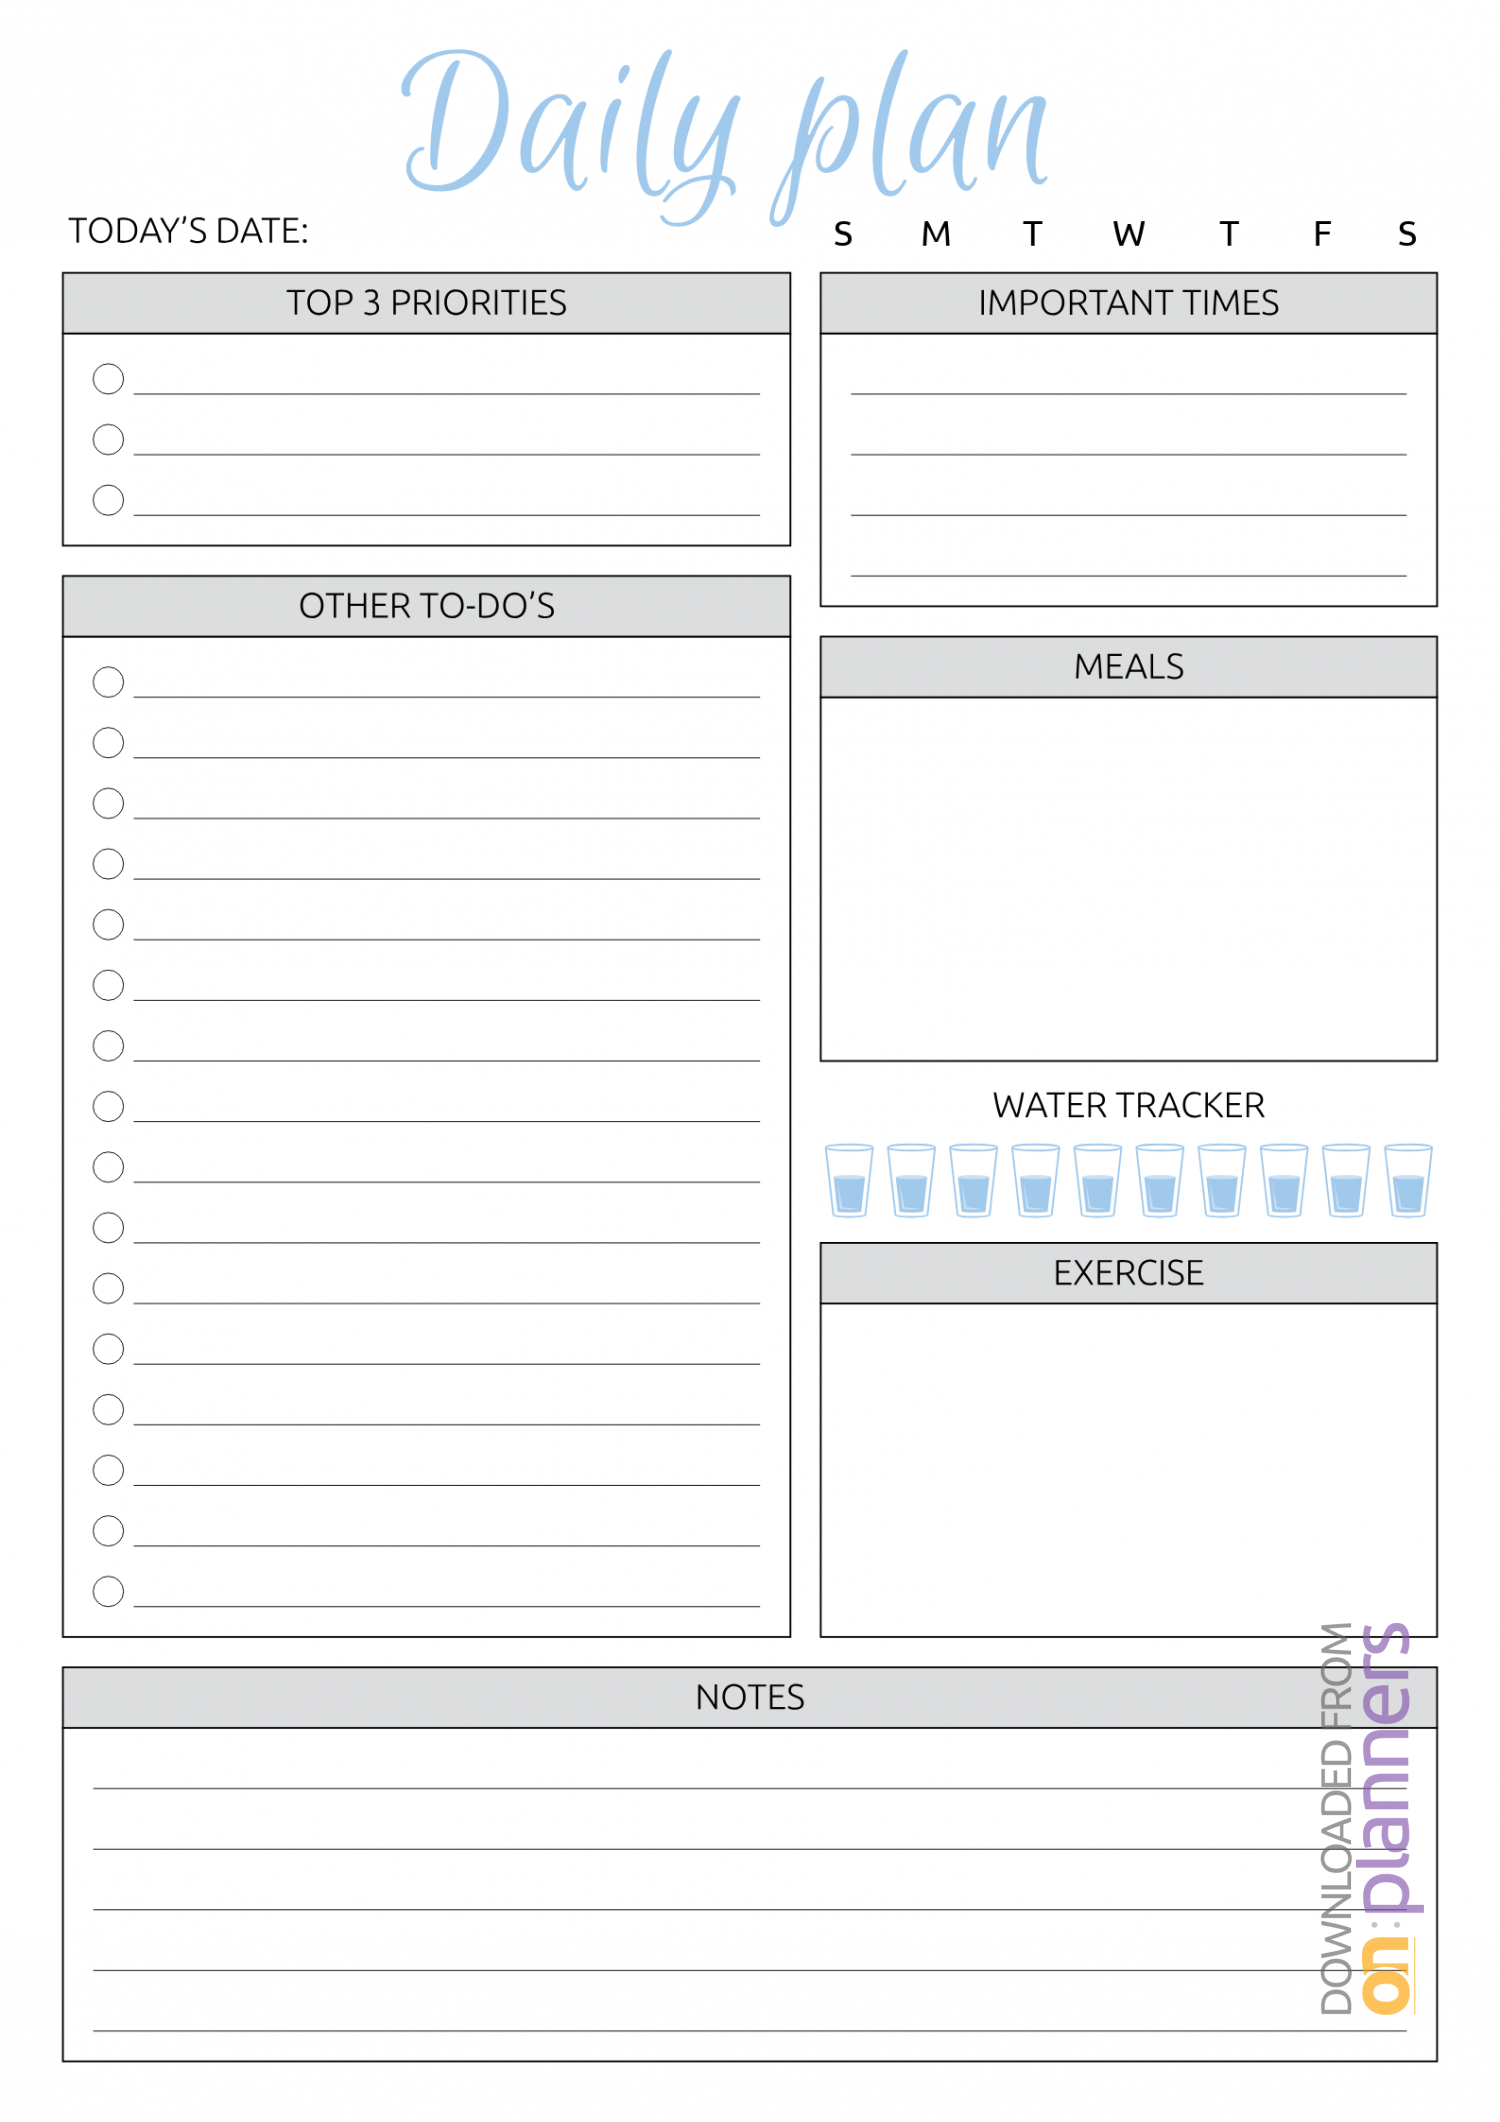 Download Printable Daily Plan With To Do List & Important Regarding Blank To Do List Template